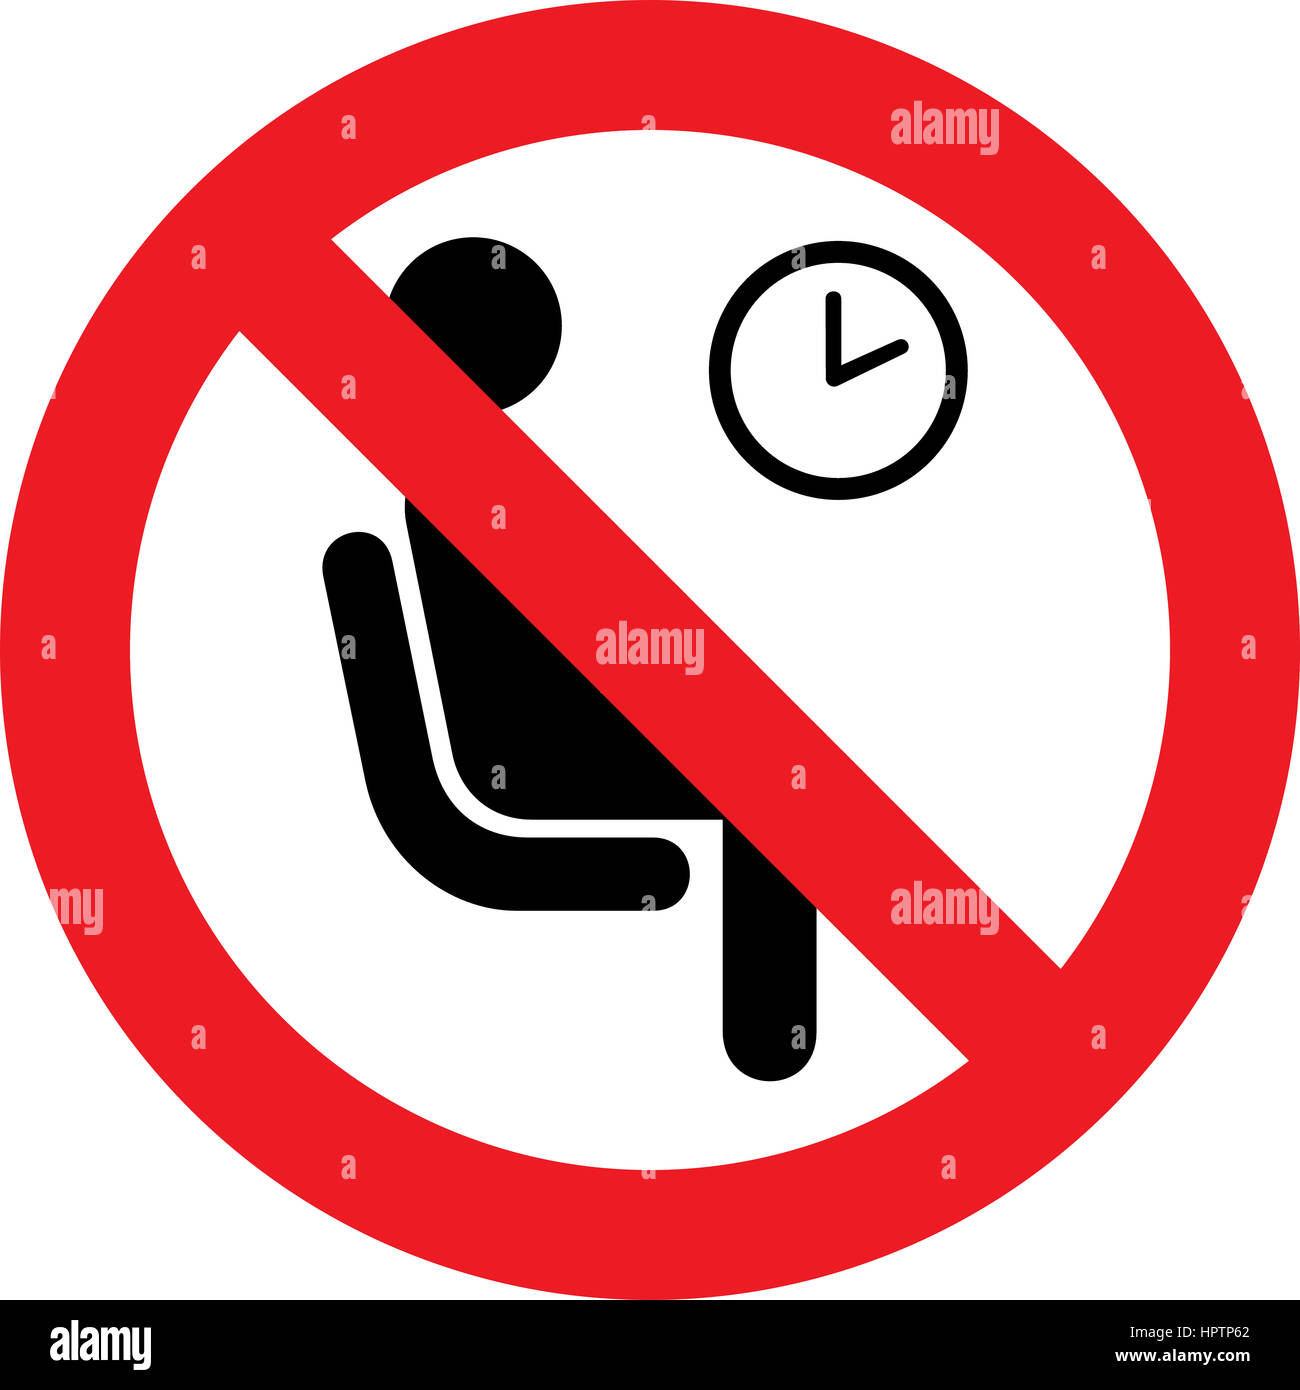 No waiting room available sign Stock Photo